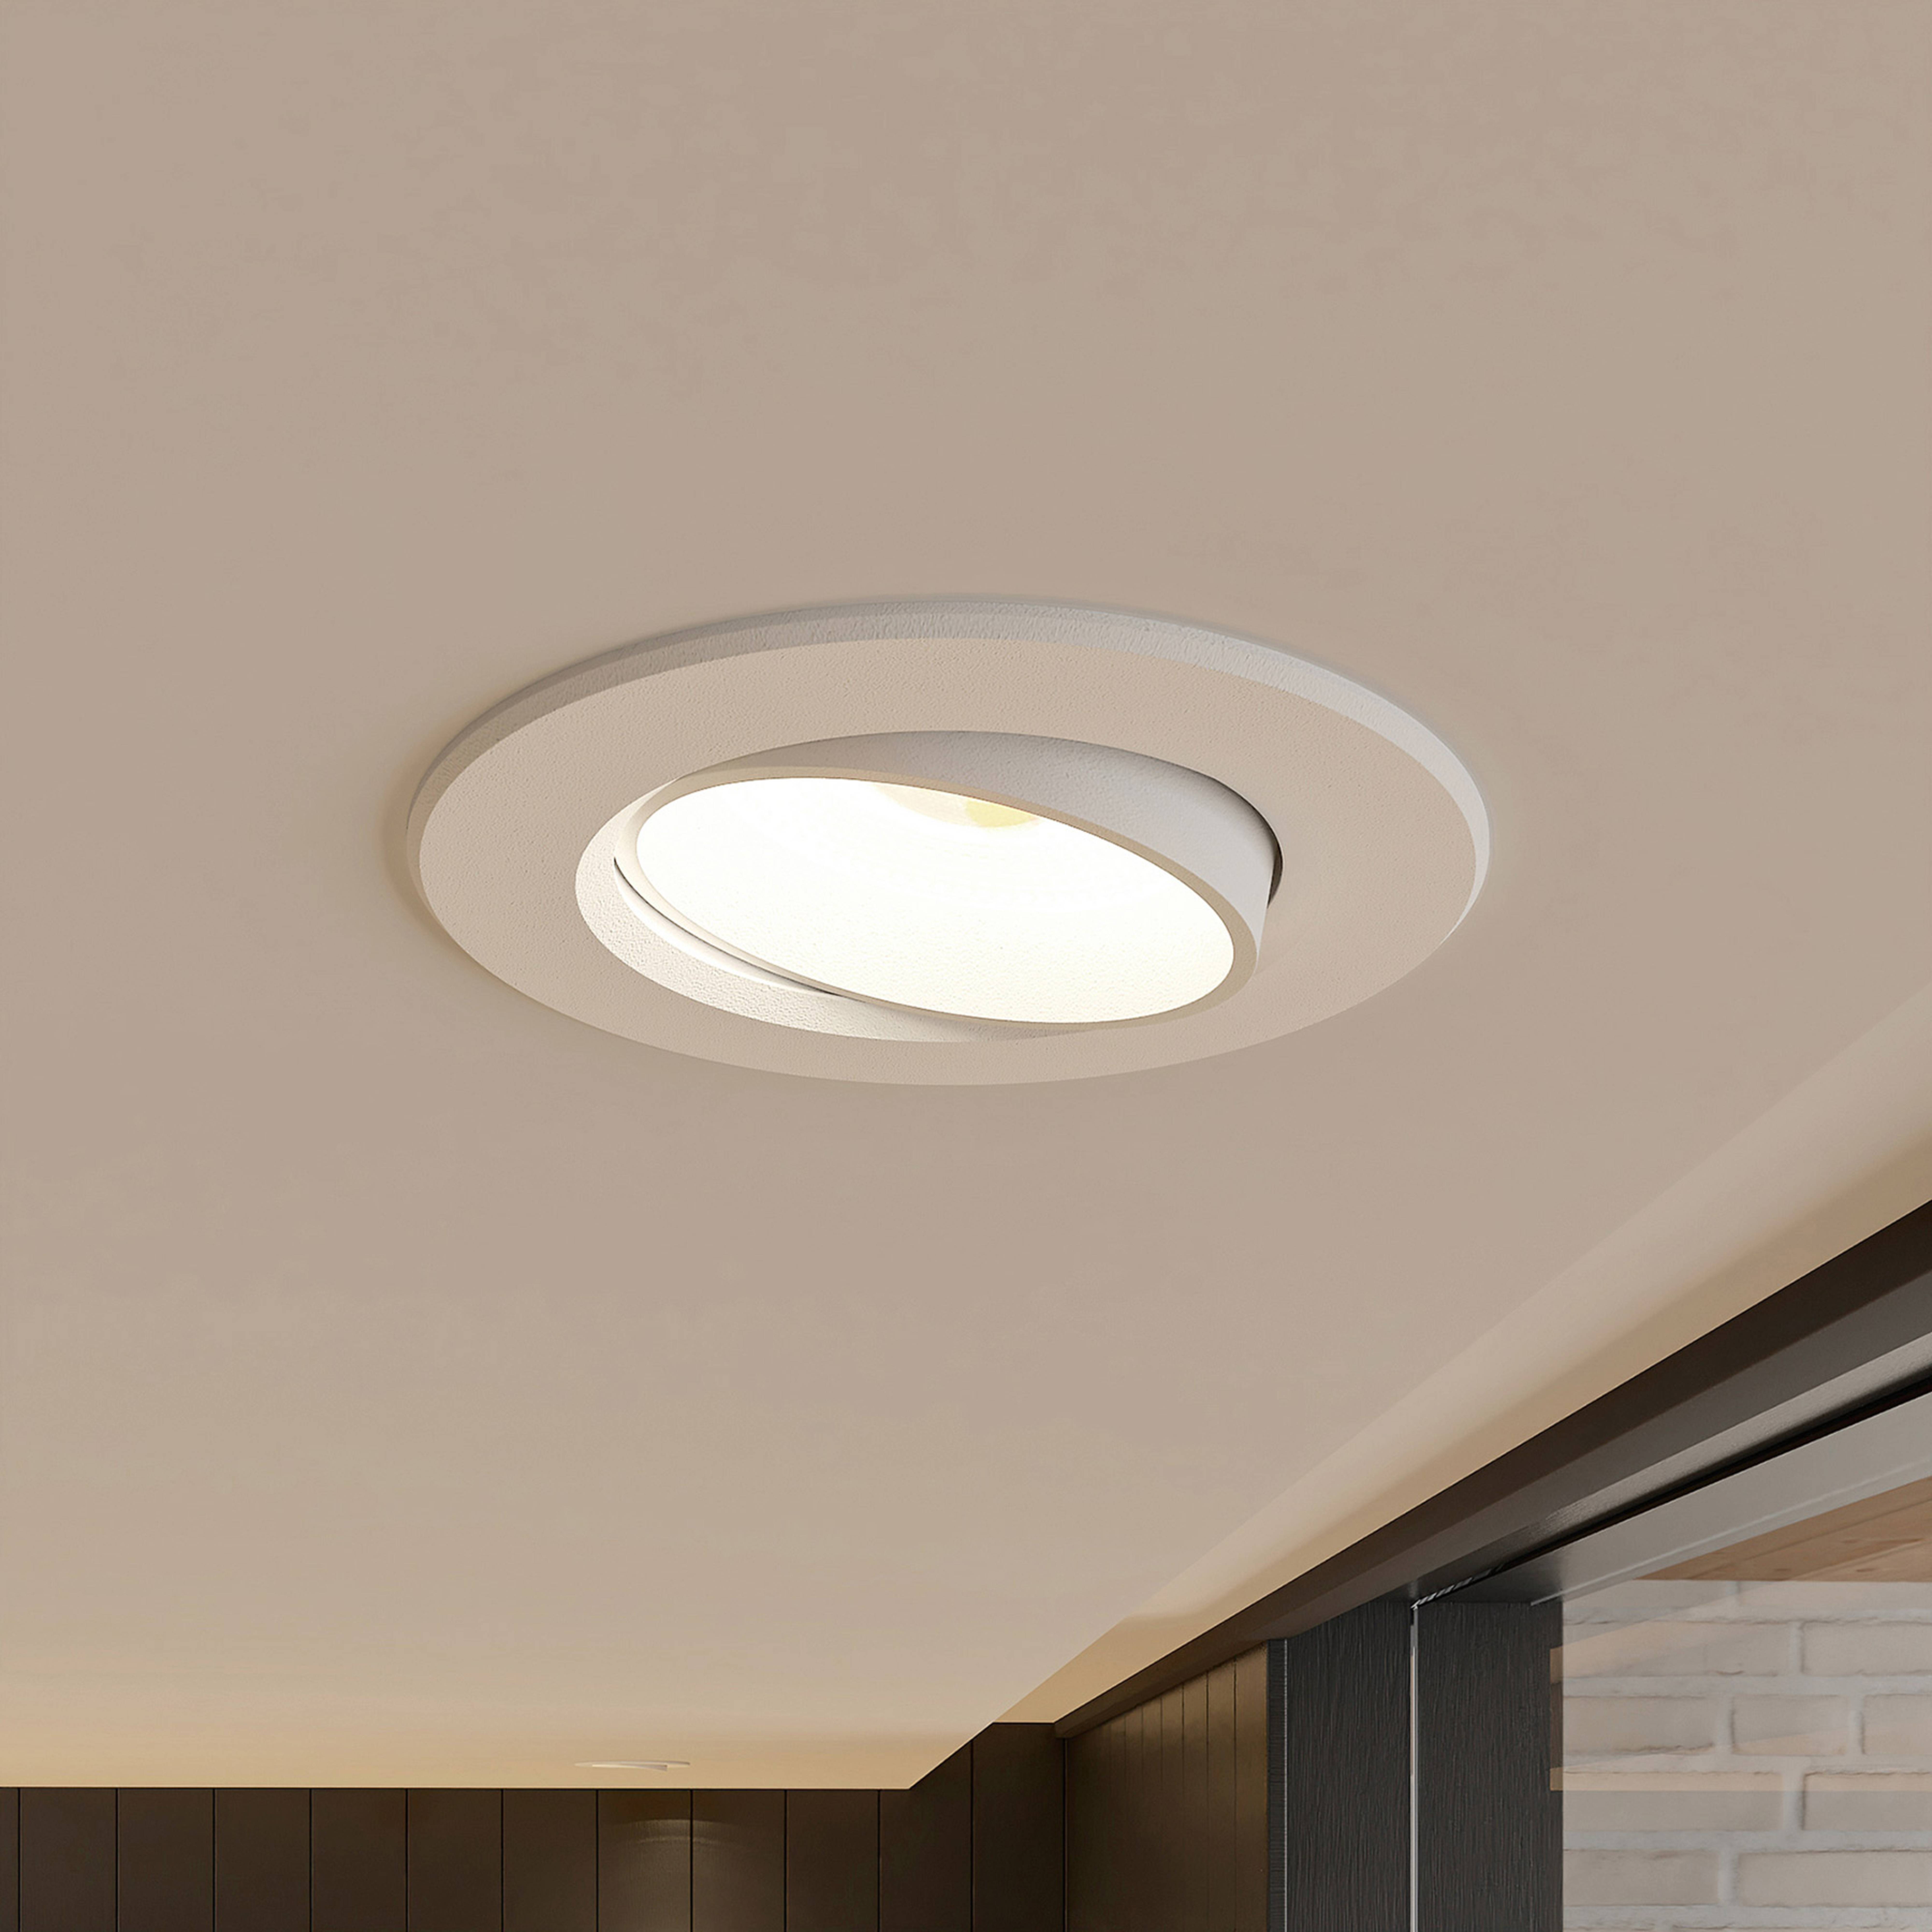 Prios LED recessed light Shimar, white, 9 W, 3000K, dimmable